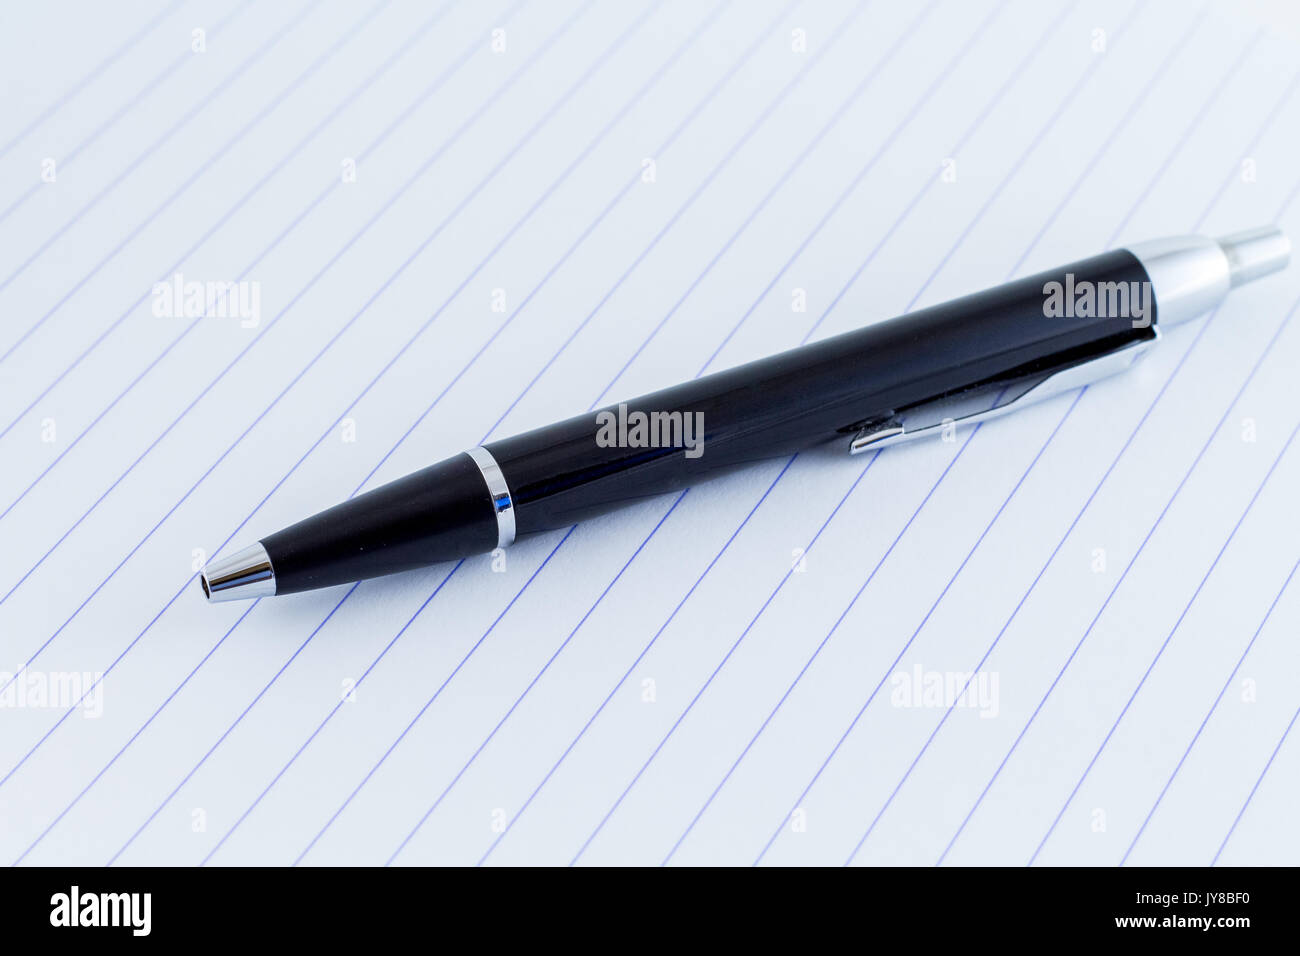 black writing pen on lines paper for writing Stock Photo